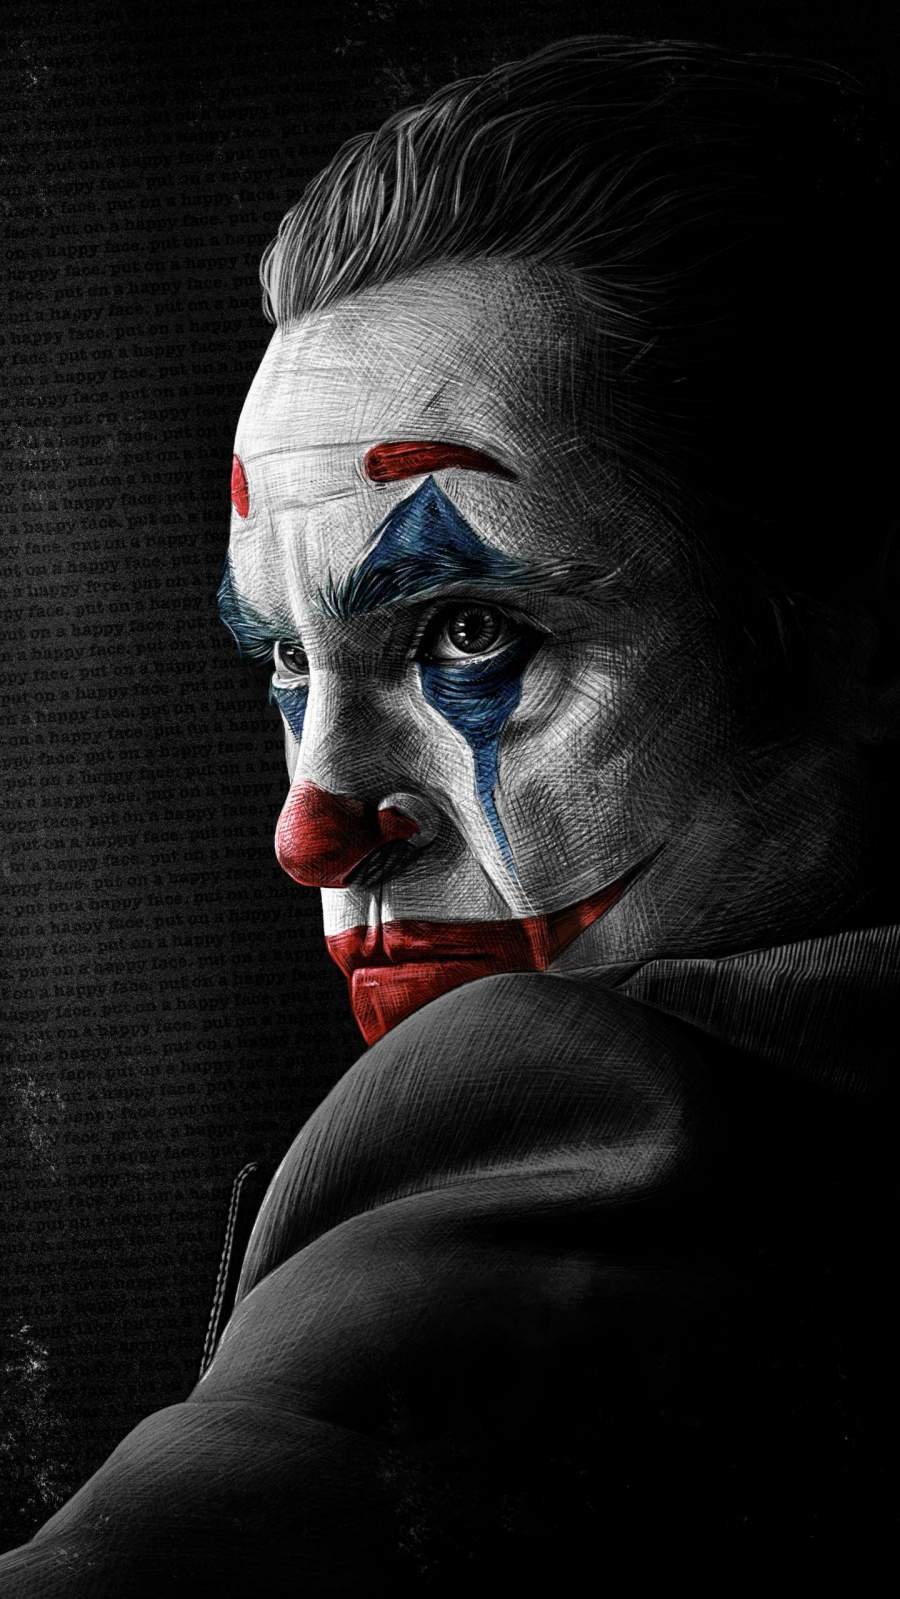 iPhone Wallpaper for iPhone iPhone 8 Plus, iPhone 6s, iPhone 6s Plus, iPhone X and iPod Touch High Quality. Joker iphone wallpaper, Joker poster, Joker image